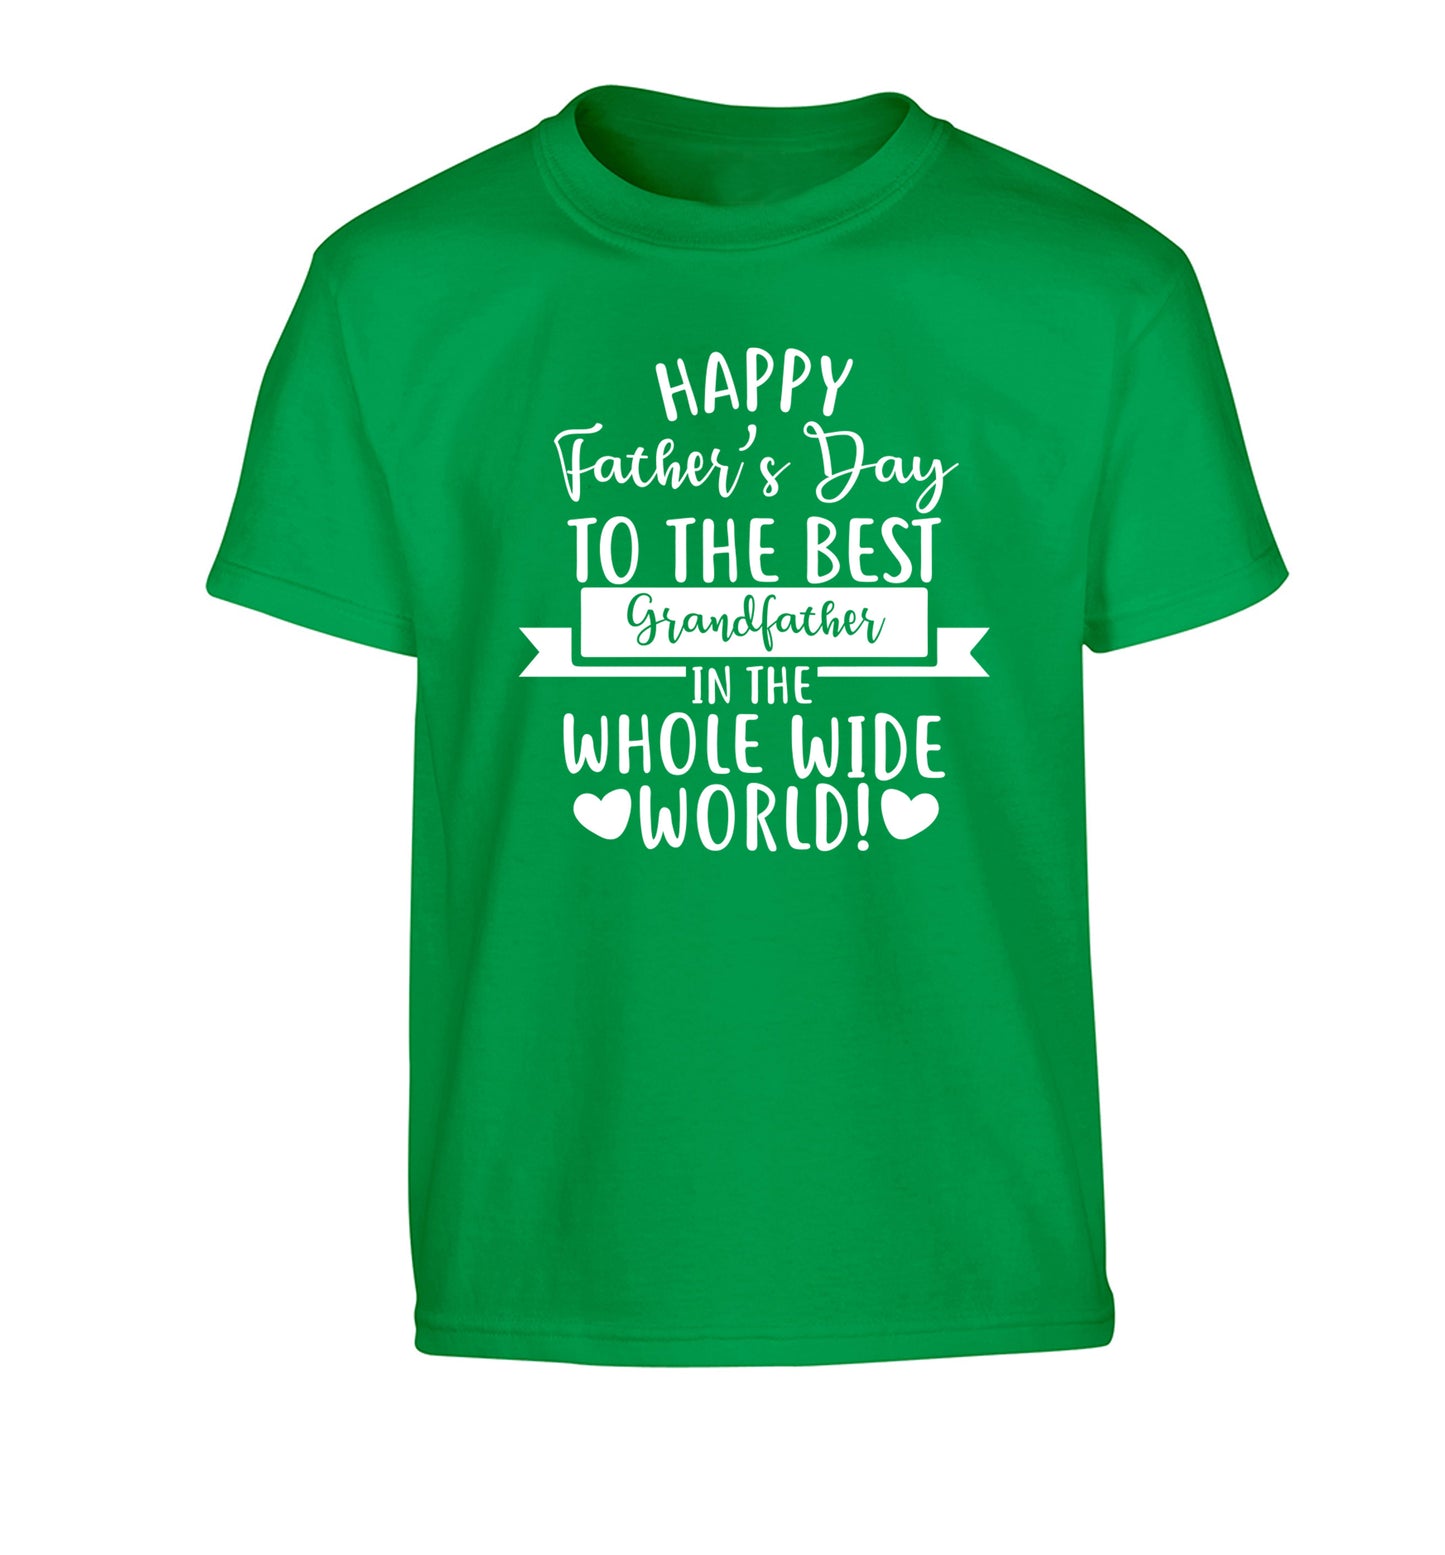 Happy Father's Day to the best grandfather in the world Children's green Tshirt 12-13 Years